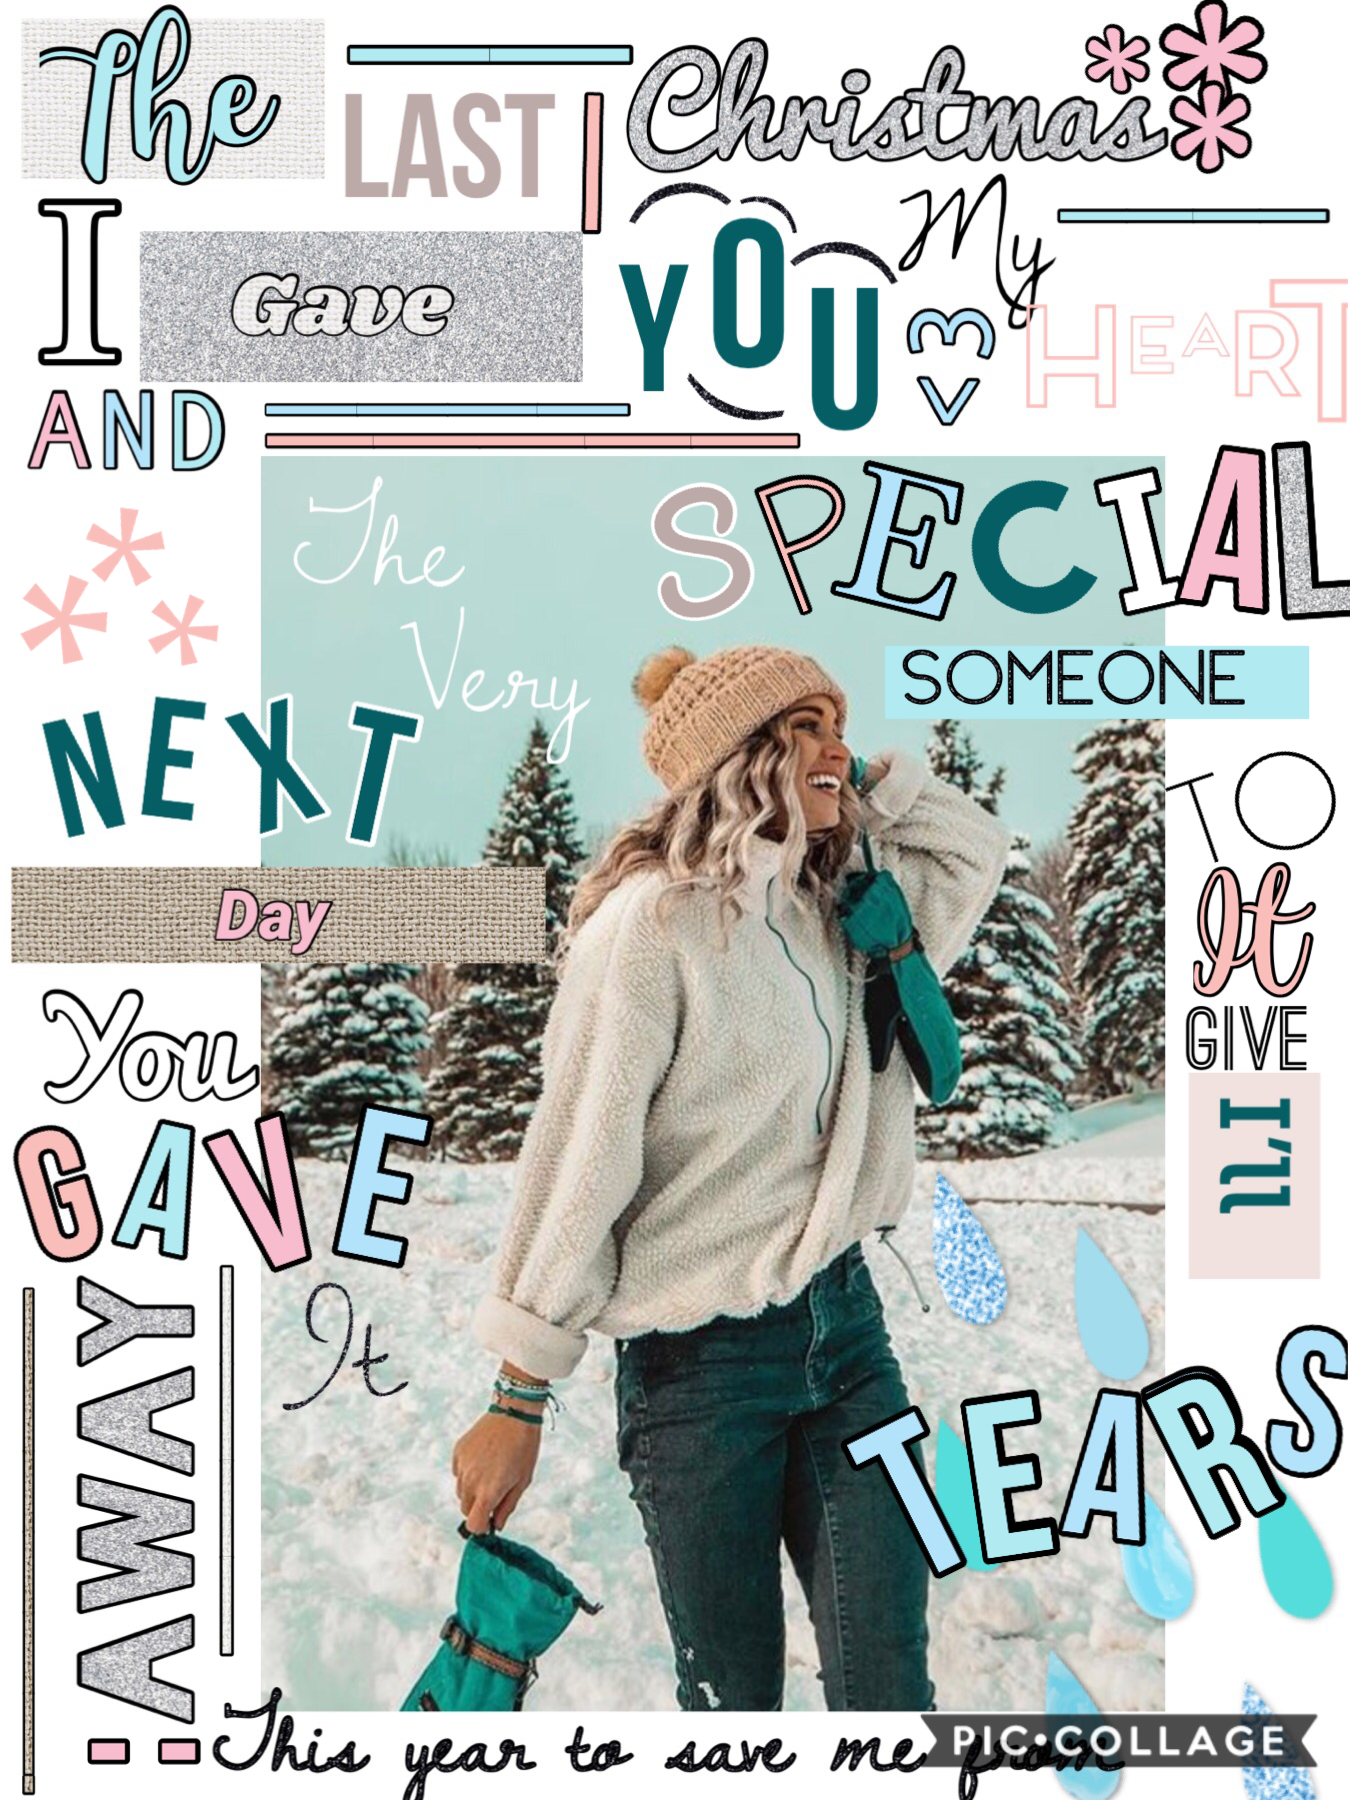 🎄Merry Christmas🎄
Almost Christmas! And I’ve finally gotten round to making my first Christmas themed collage of the year, Yay! Also this is an entry to PicCollage’s last challenge of 2019☺️💕